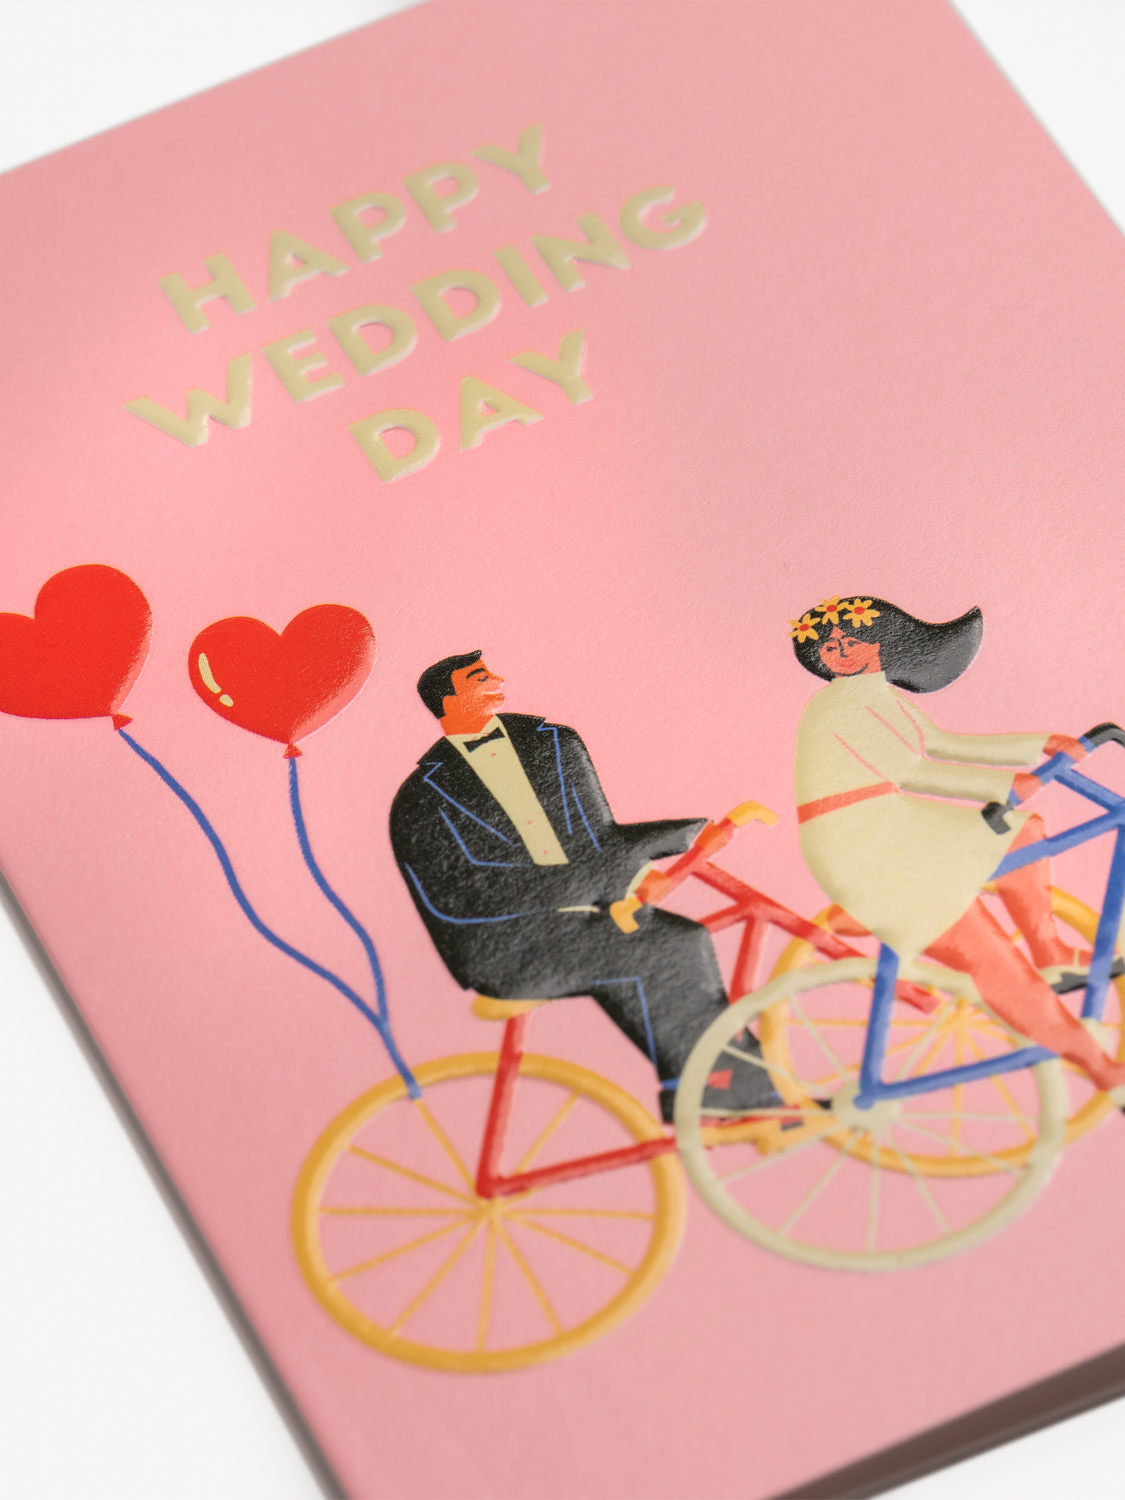 Load image into Gallery viewer, Happy Wedding Day Card
